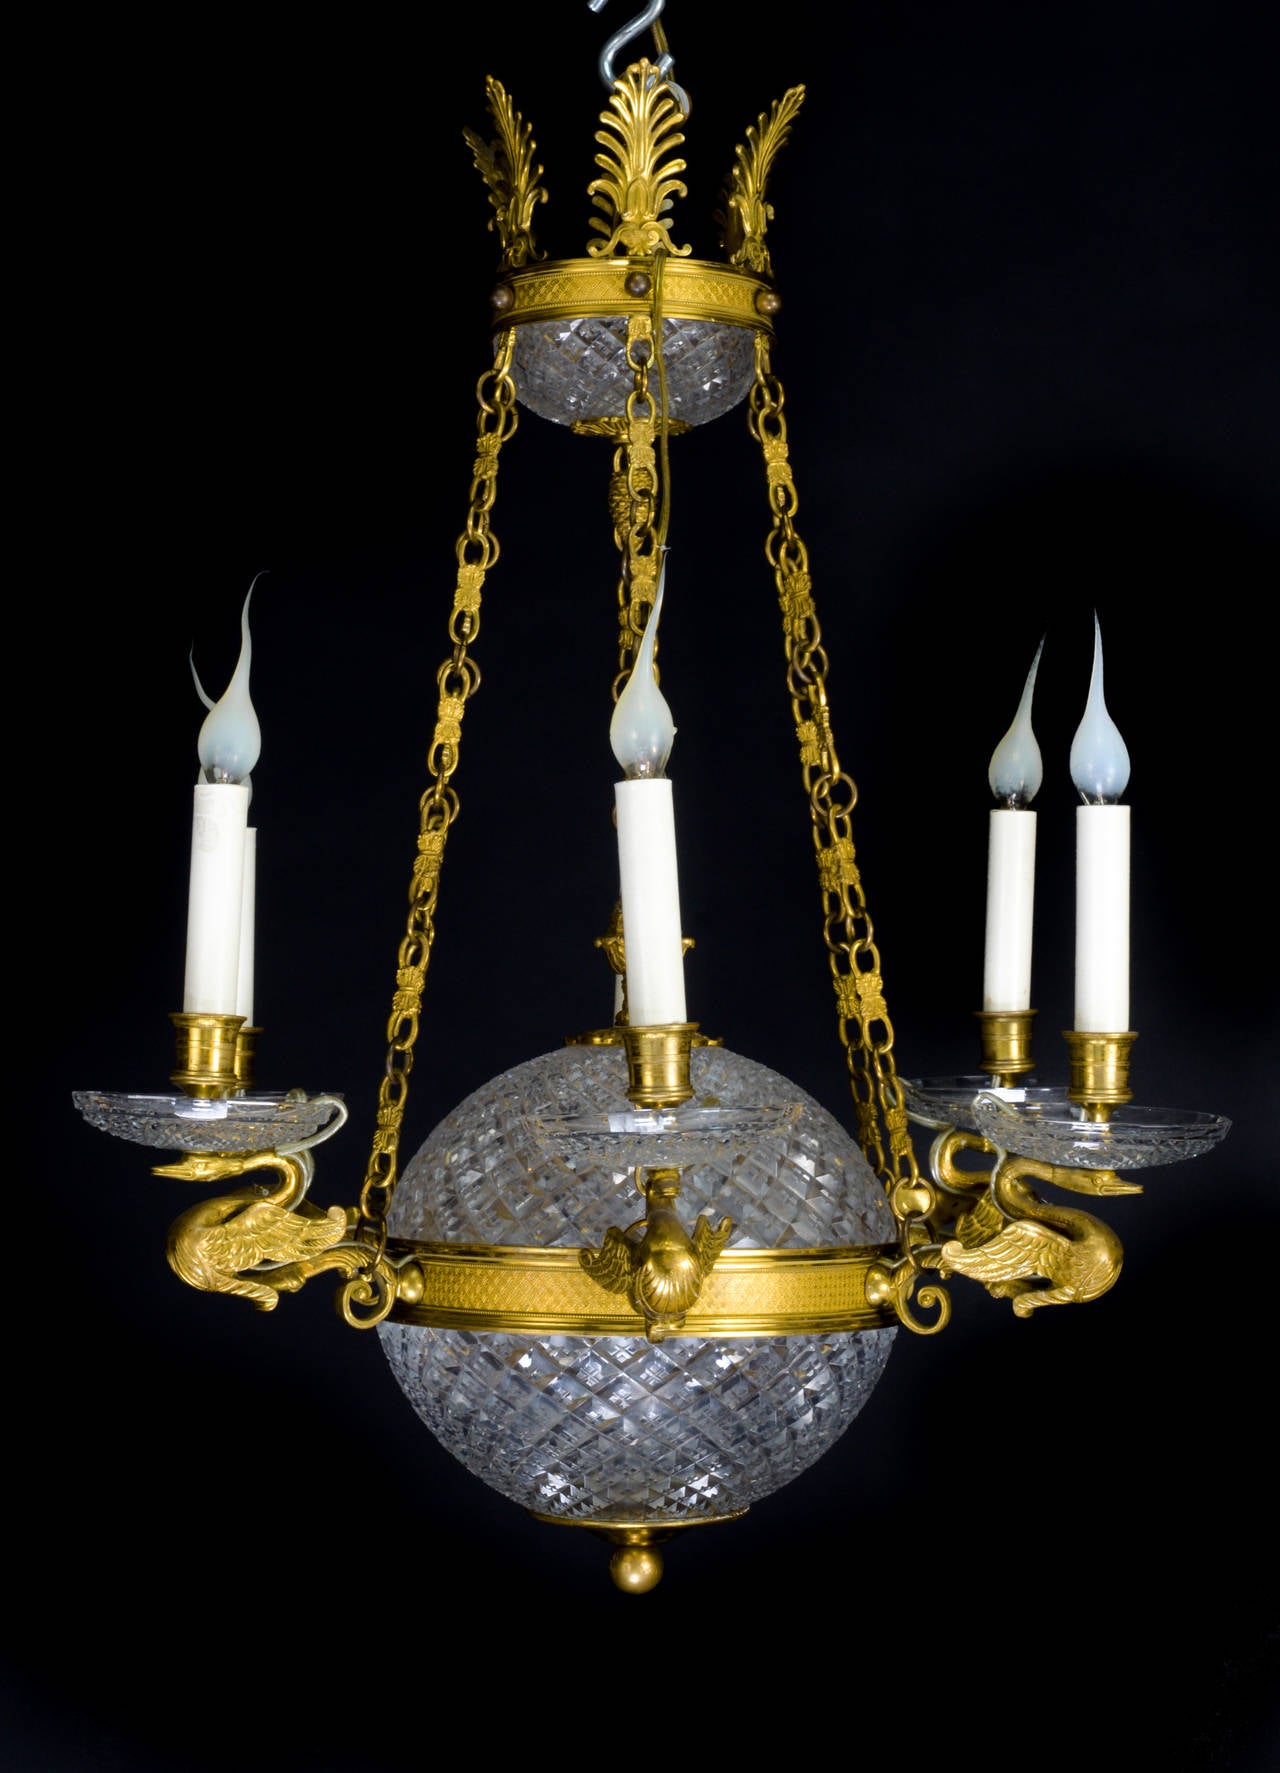 A fine antique French neoclassical style gilt bronze and cut crystal ball form chandelier embellished with a cut crystal central ball and decorated with six gilt bronze swan arms.